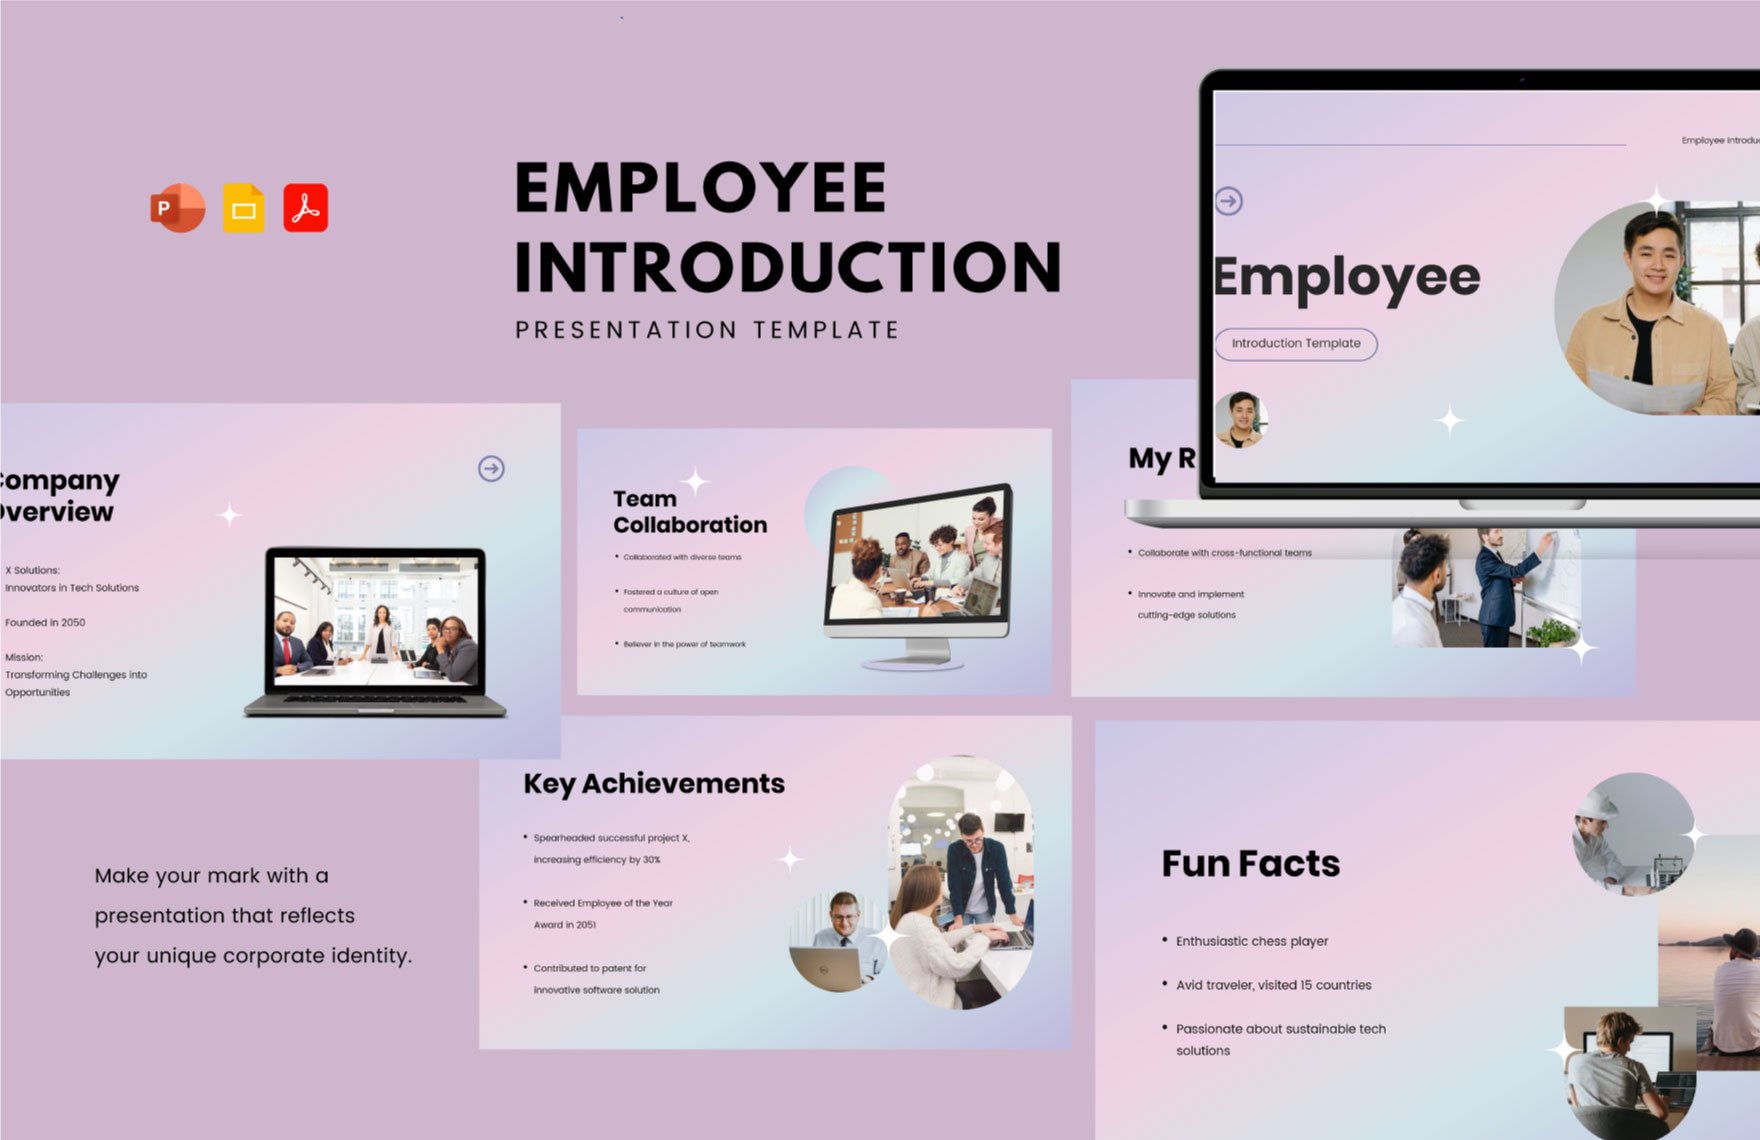 Employee Introduction Template